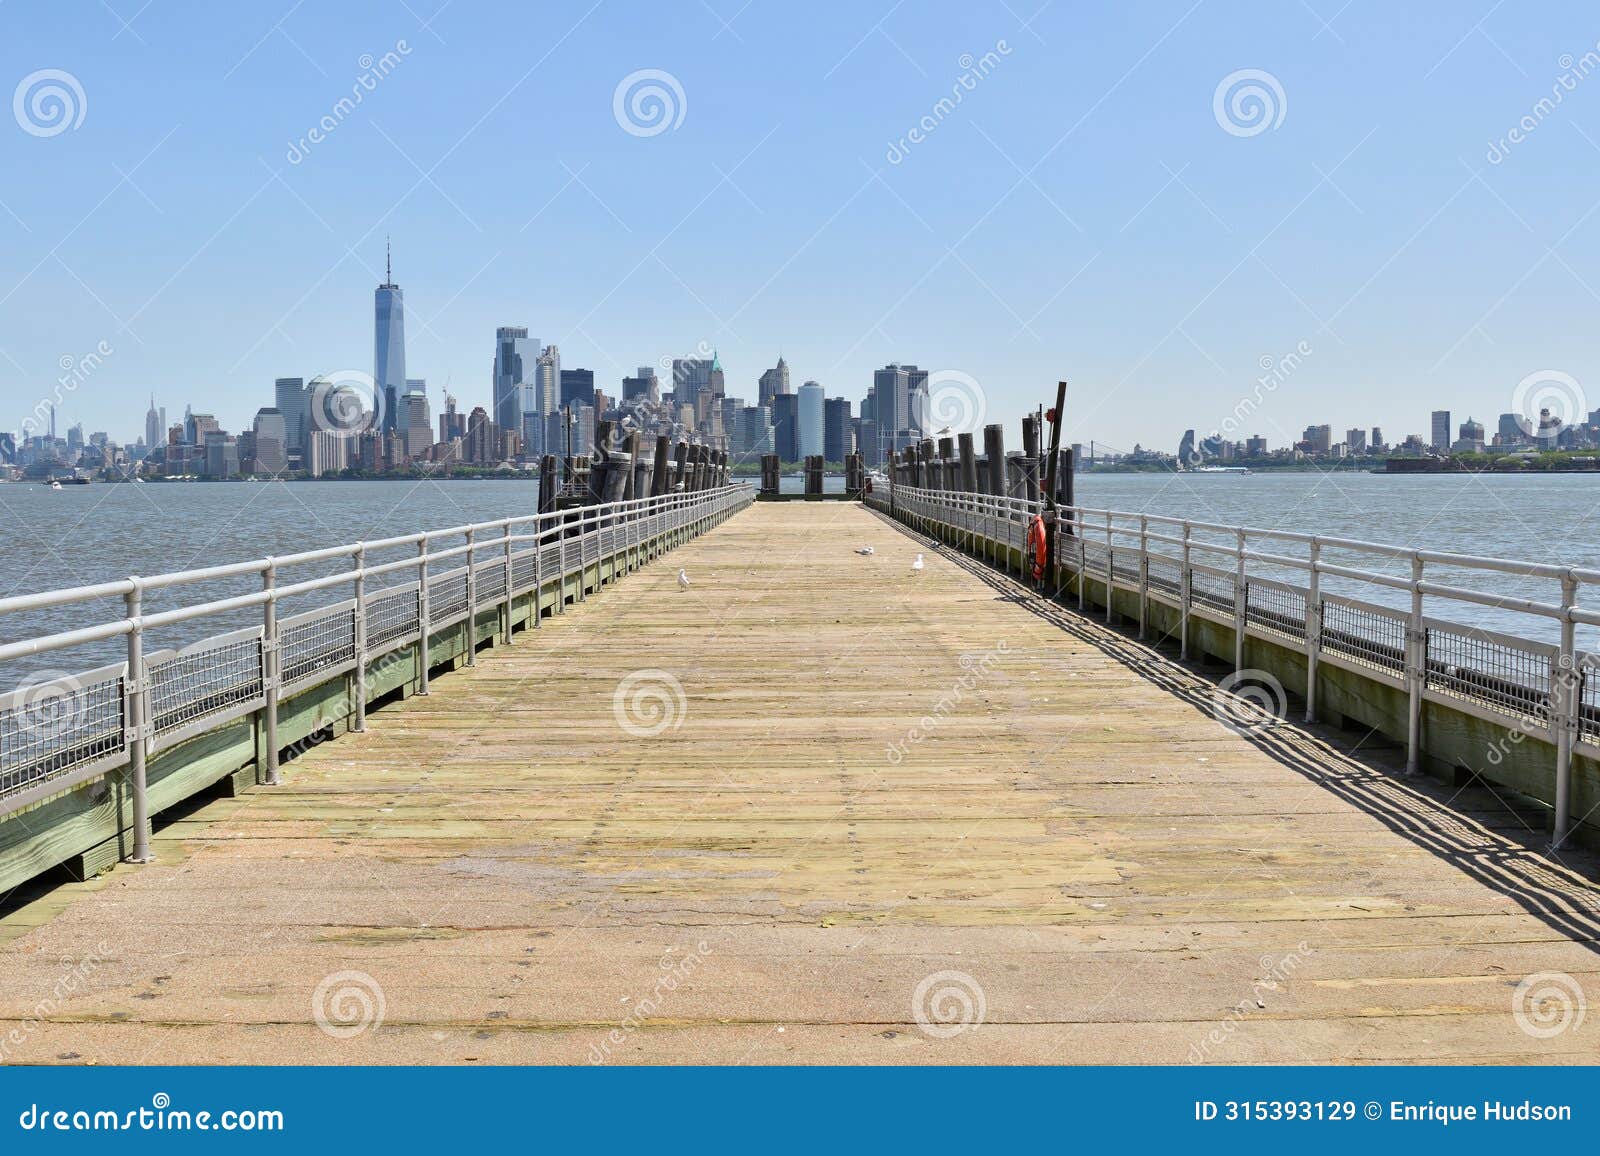 jetty with a view of manhattan skyline from liberty island, ny